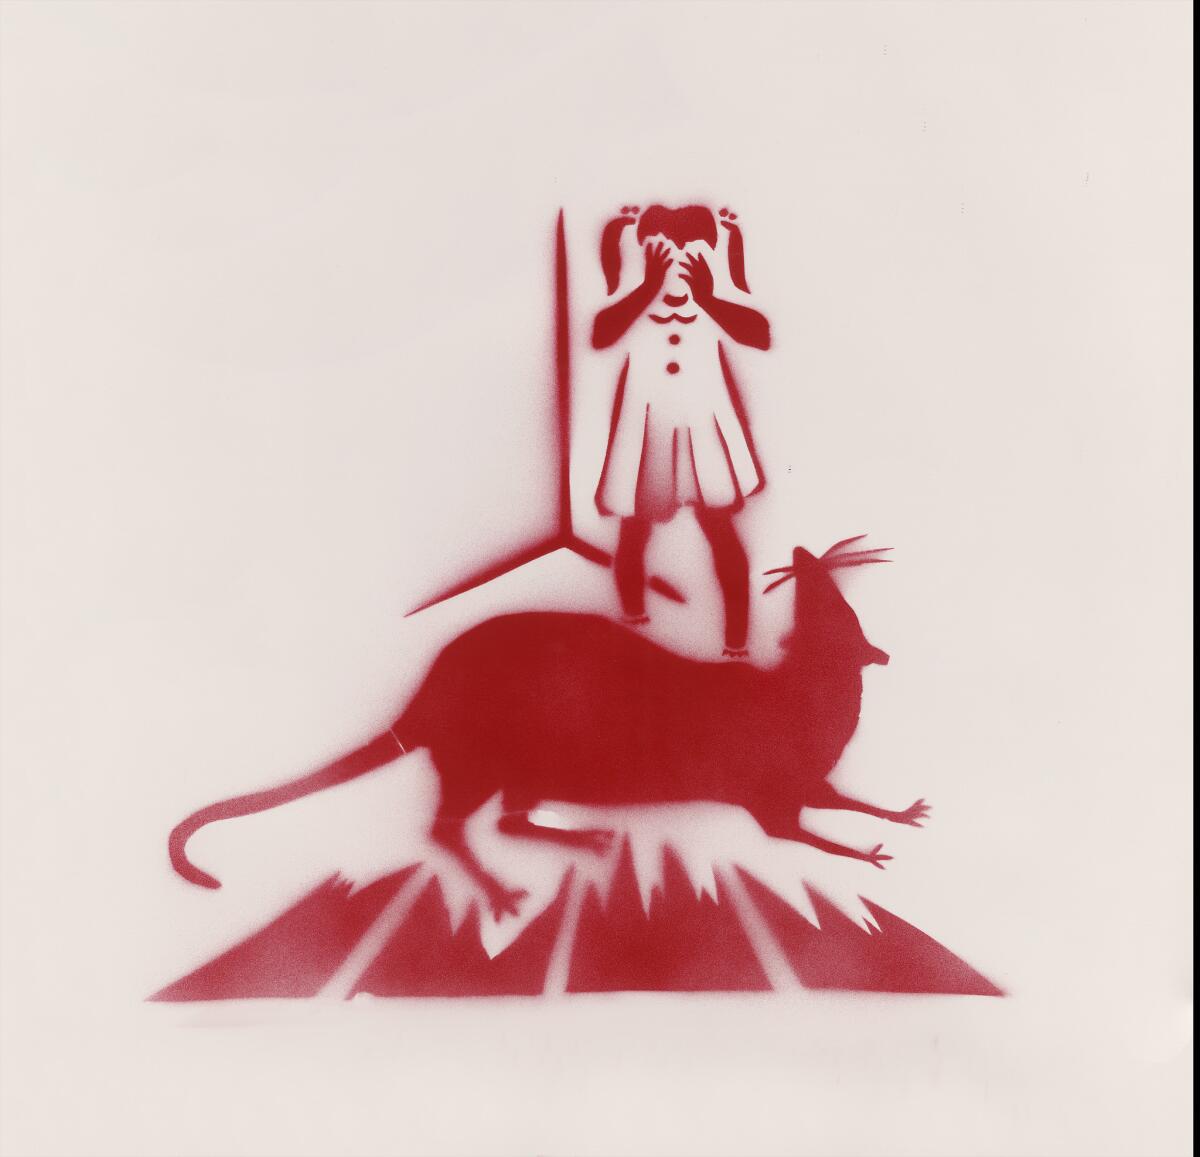 Untitled (Girl With Rat), Leslie Bender, Political Art Documentation and Distribution, stencil, circa 1983, New York. (Center for the Study of Political Graphics)